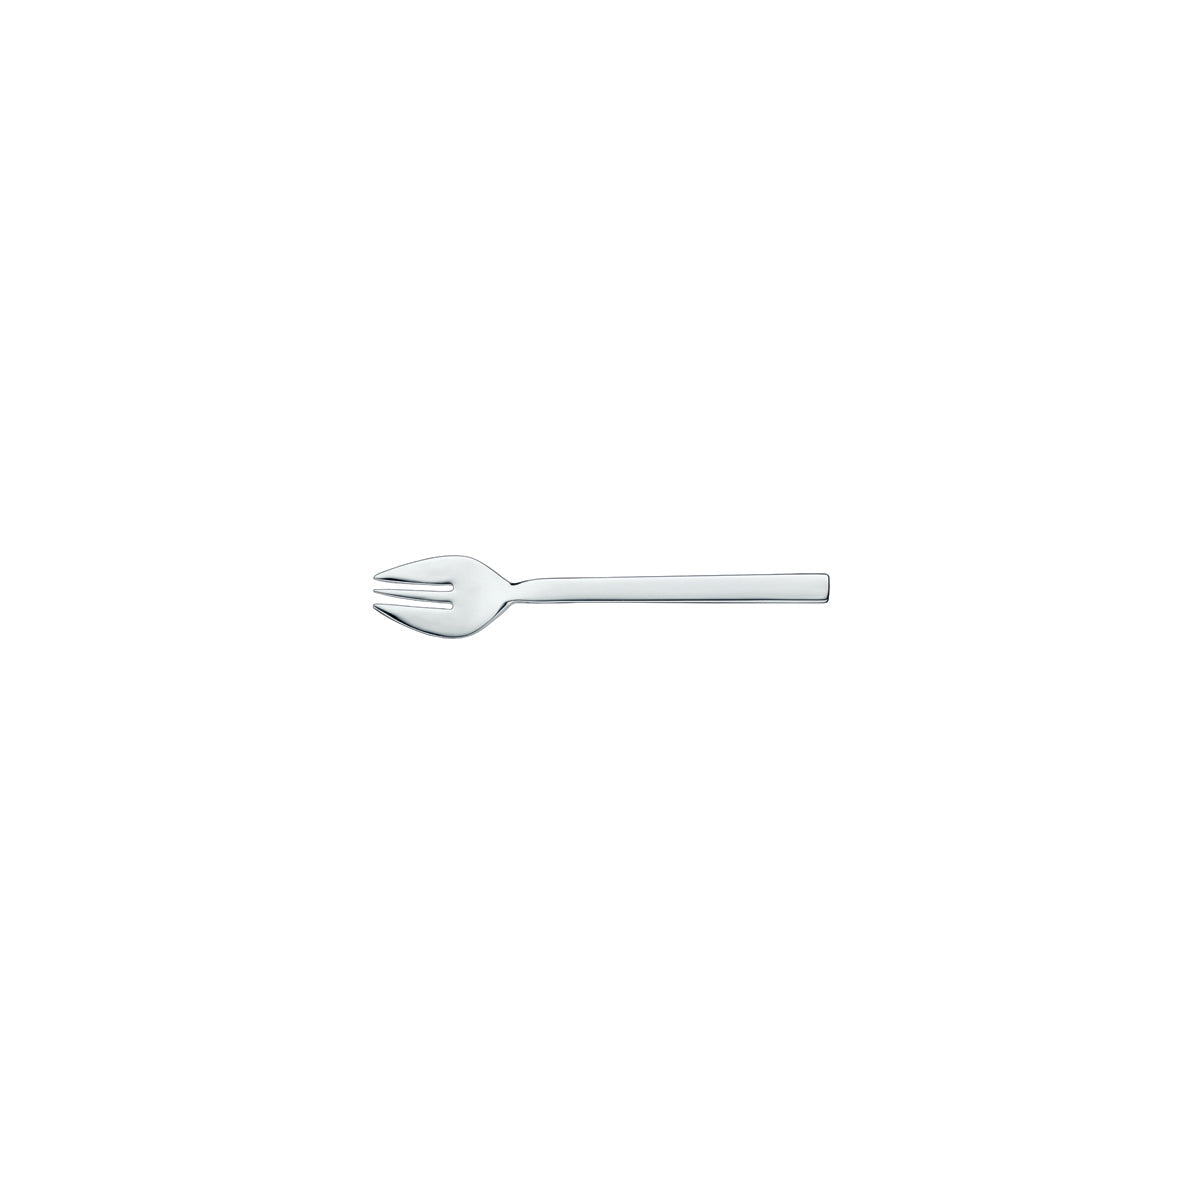 12.5340.6040 WMF Unic Oyster Fork Stainless Steel Tomkin Australia Hospitality Supplies